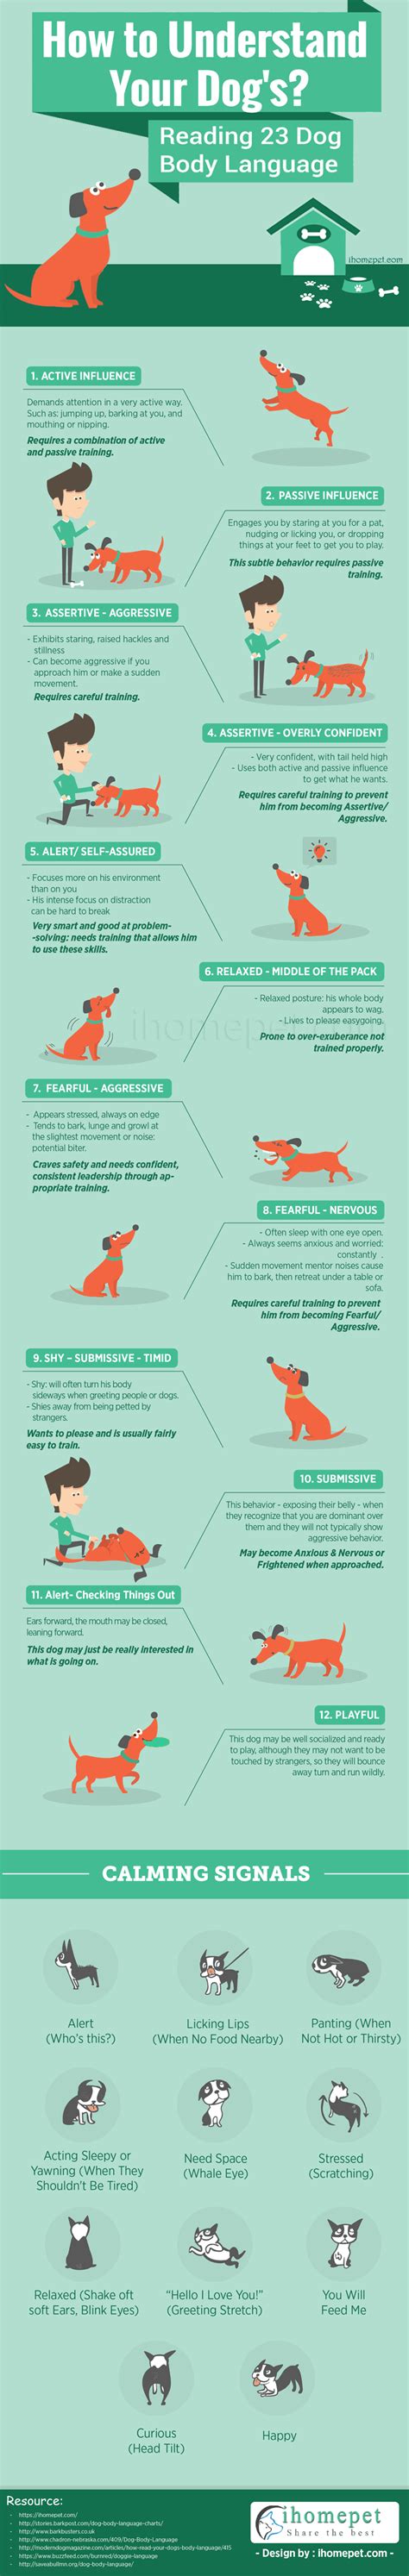 Understand Your Dog Read 23 Dog Body Language Cues